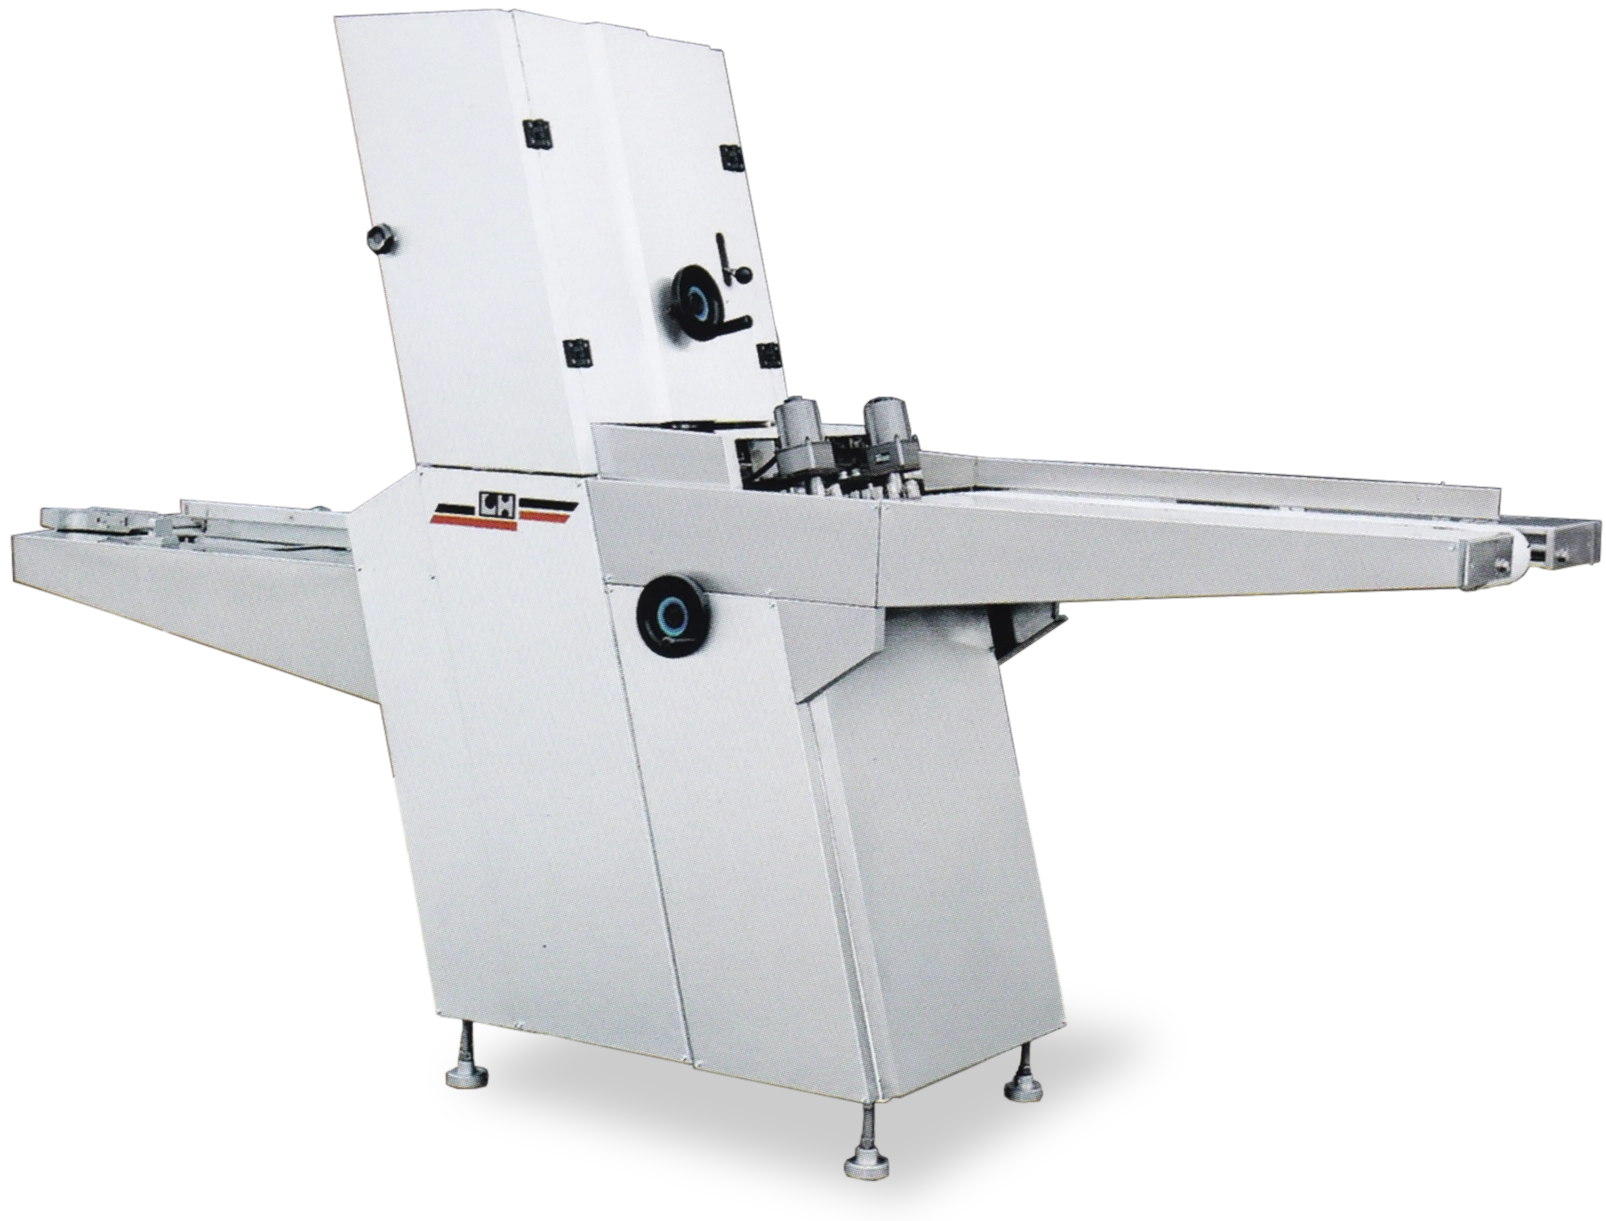 Automatic Band Slicer